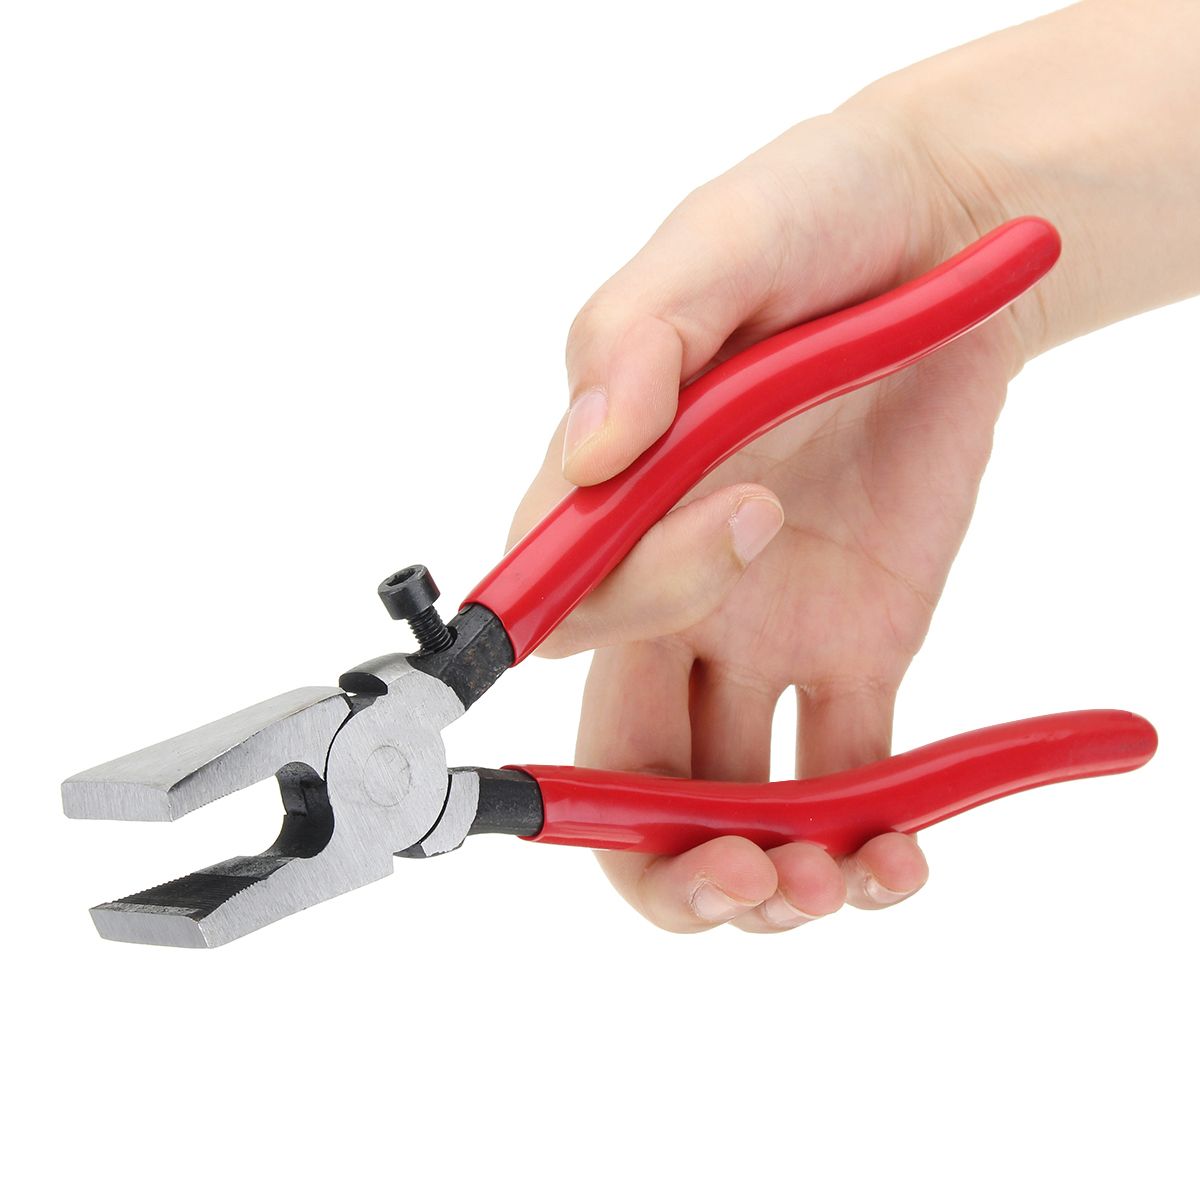 Stained-Glass-Tool-Kit-Running-Pliers-Breaking-Grozing-Pliers-Grip-Cutter-Non-slip-Handle-1334030